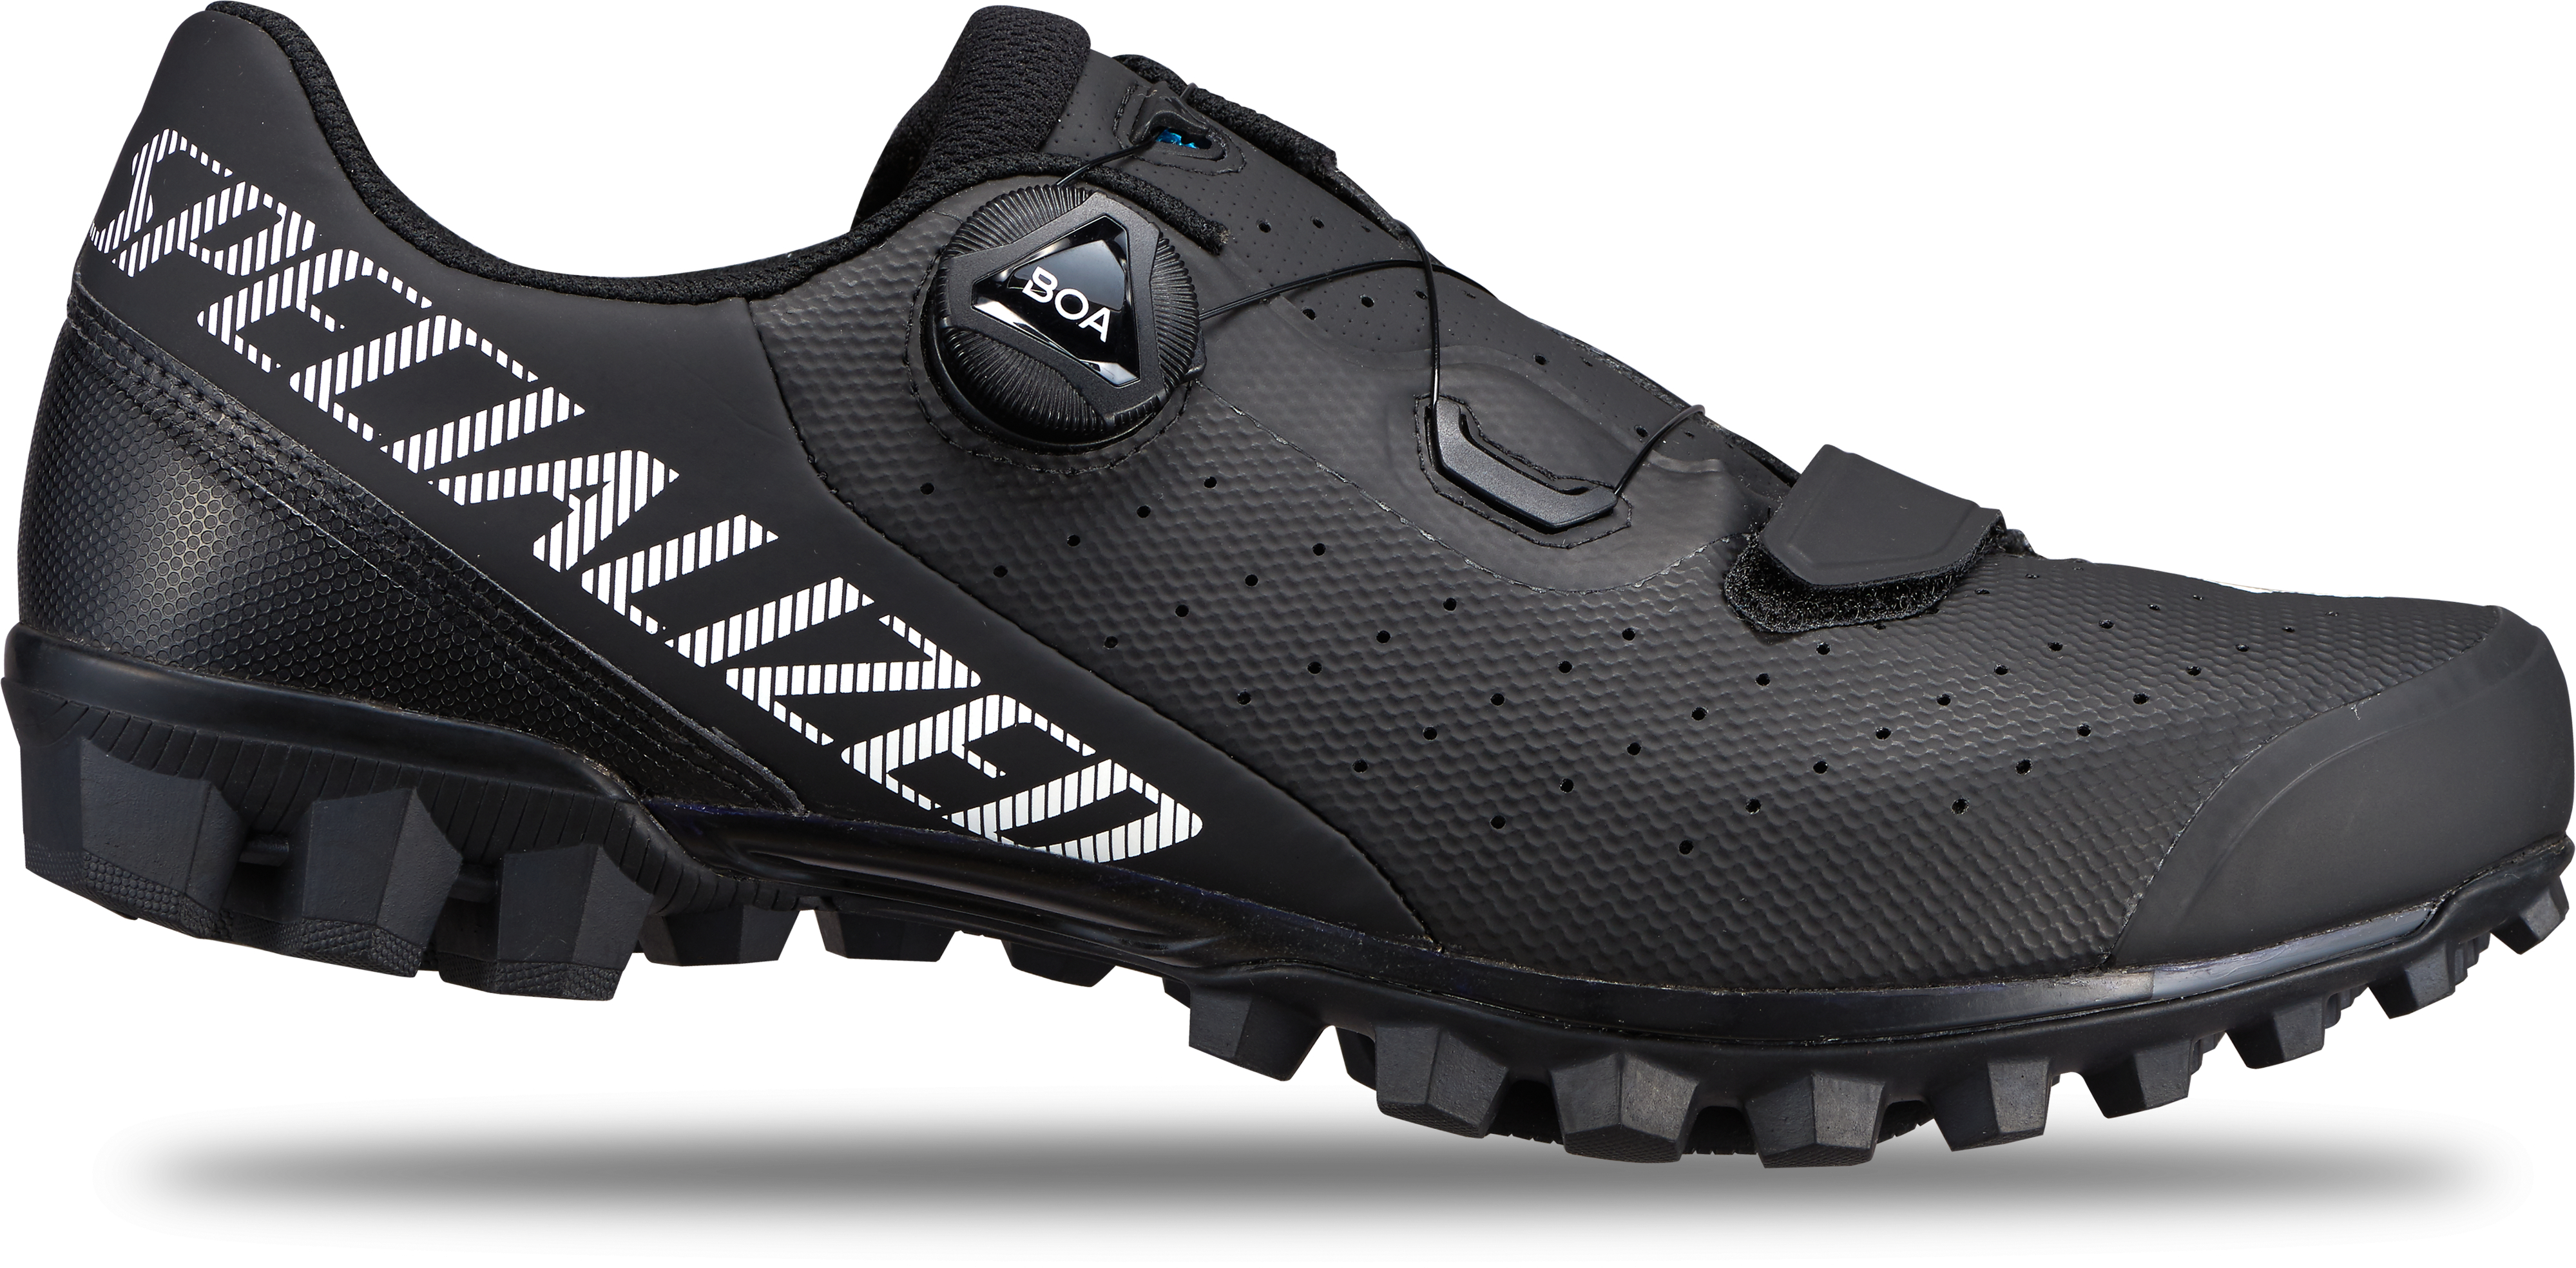 Specialized  Recon 2.0 Mountain Bike Shoes  42 Black